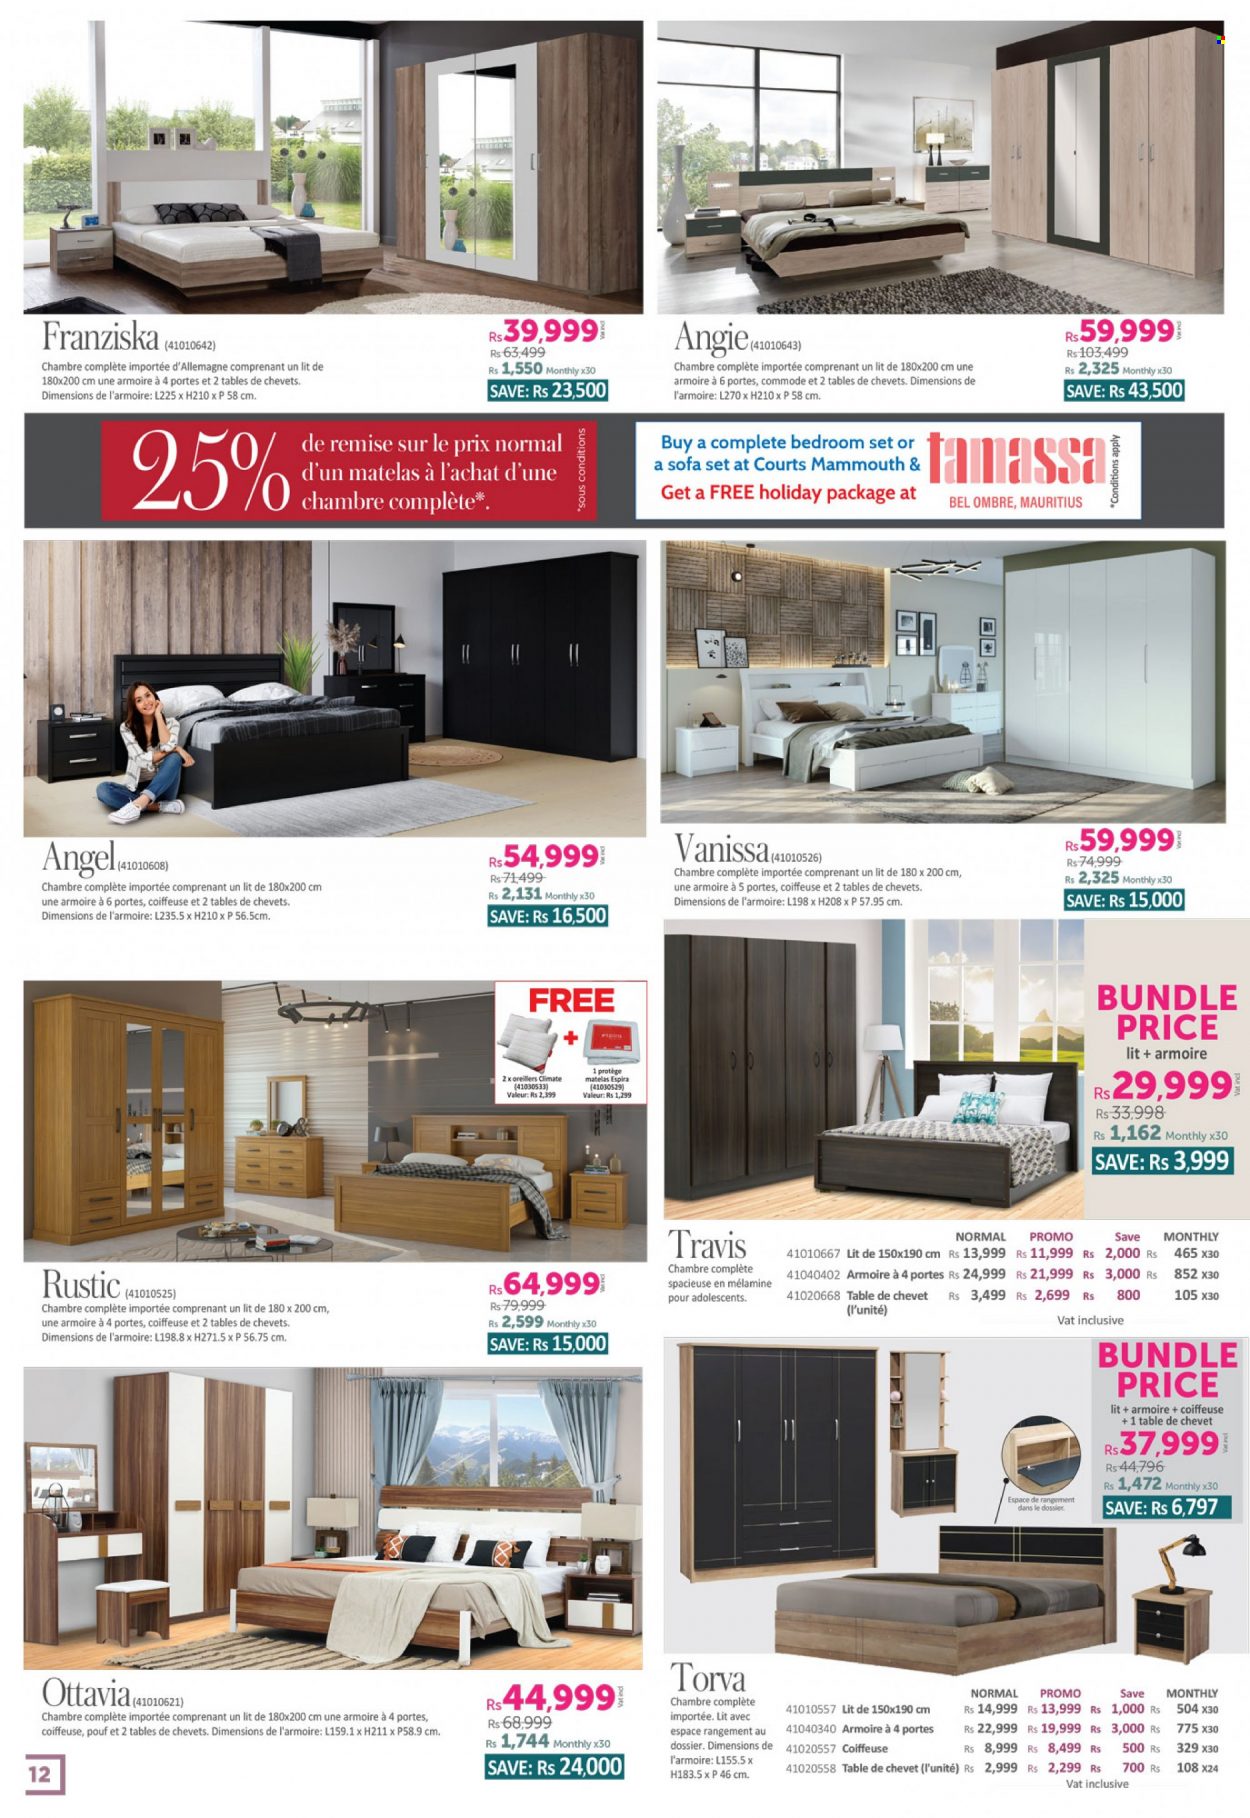 Courts Mammouth Catalogue - 9.05.2022 - 9.06.2022 - Sales products - table, sofa. Page 12.